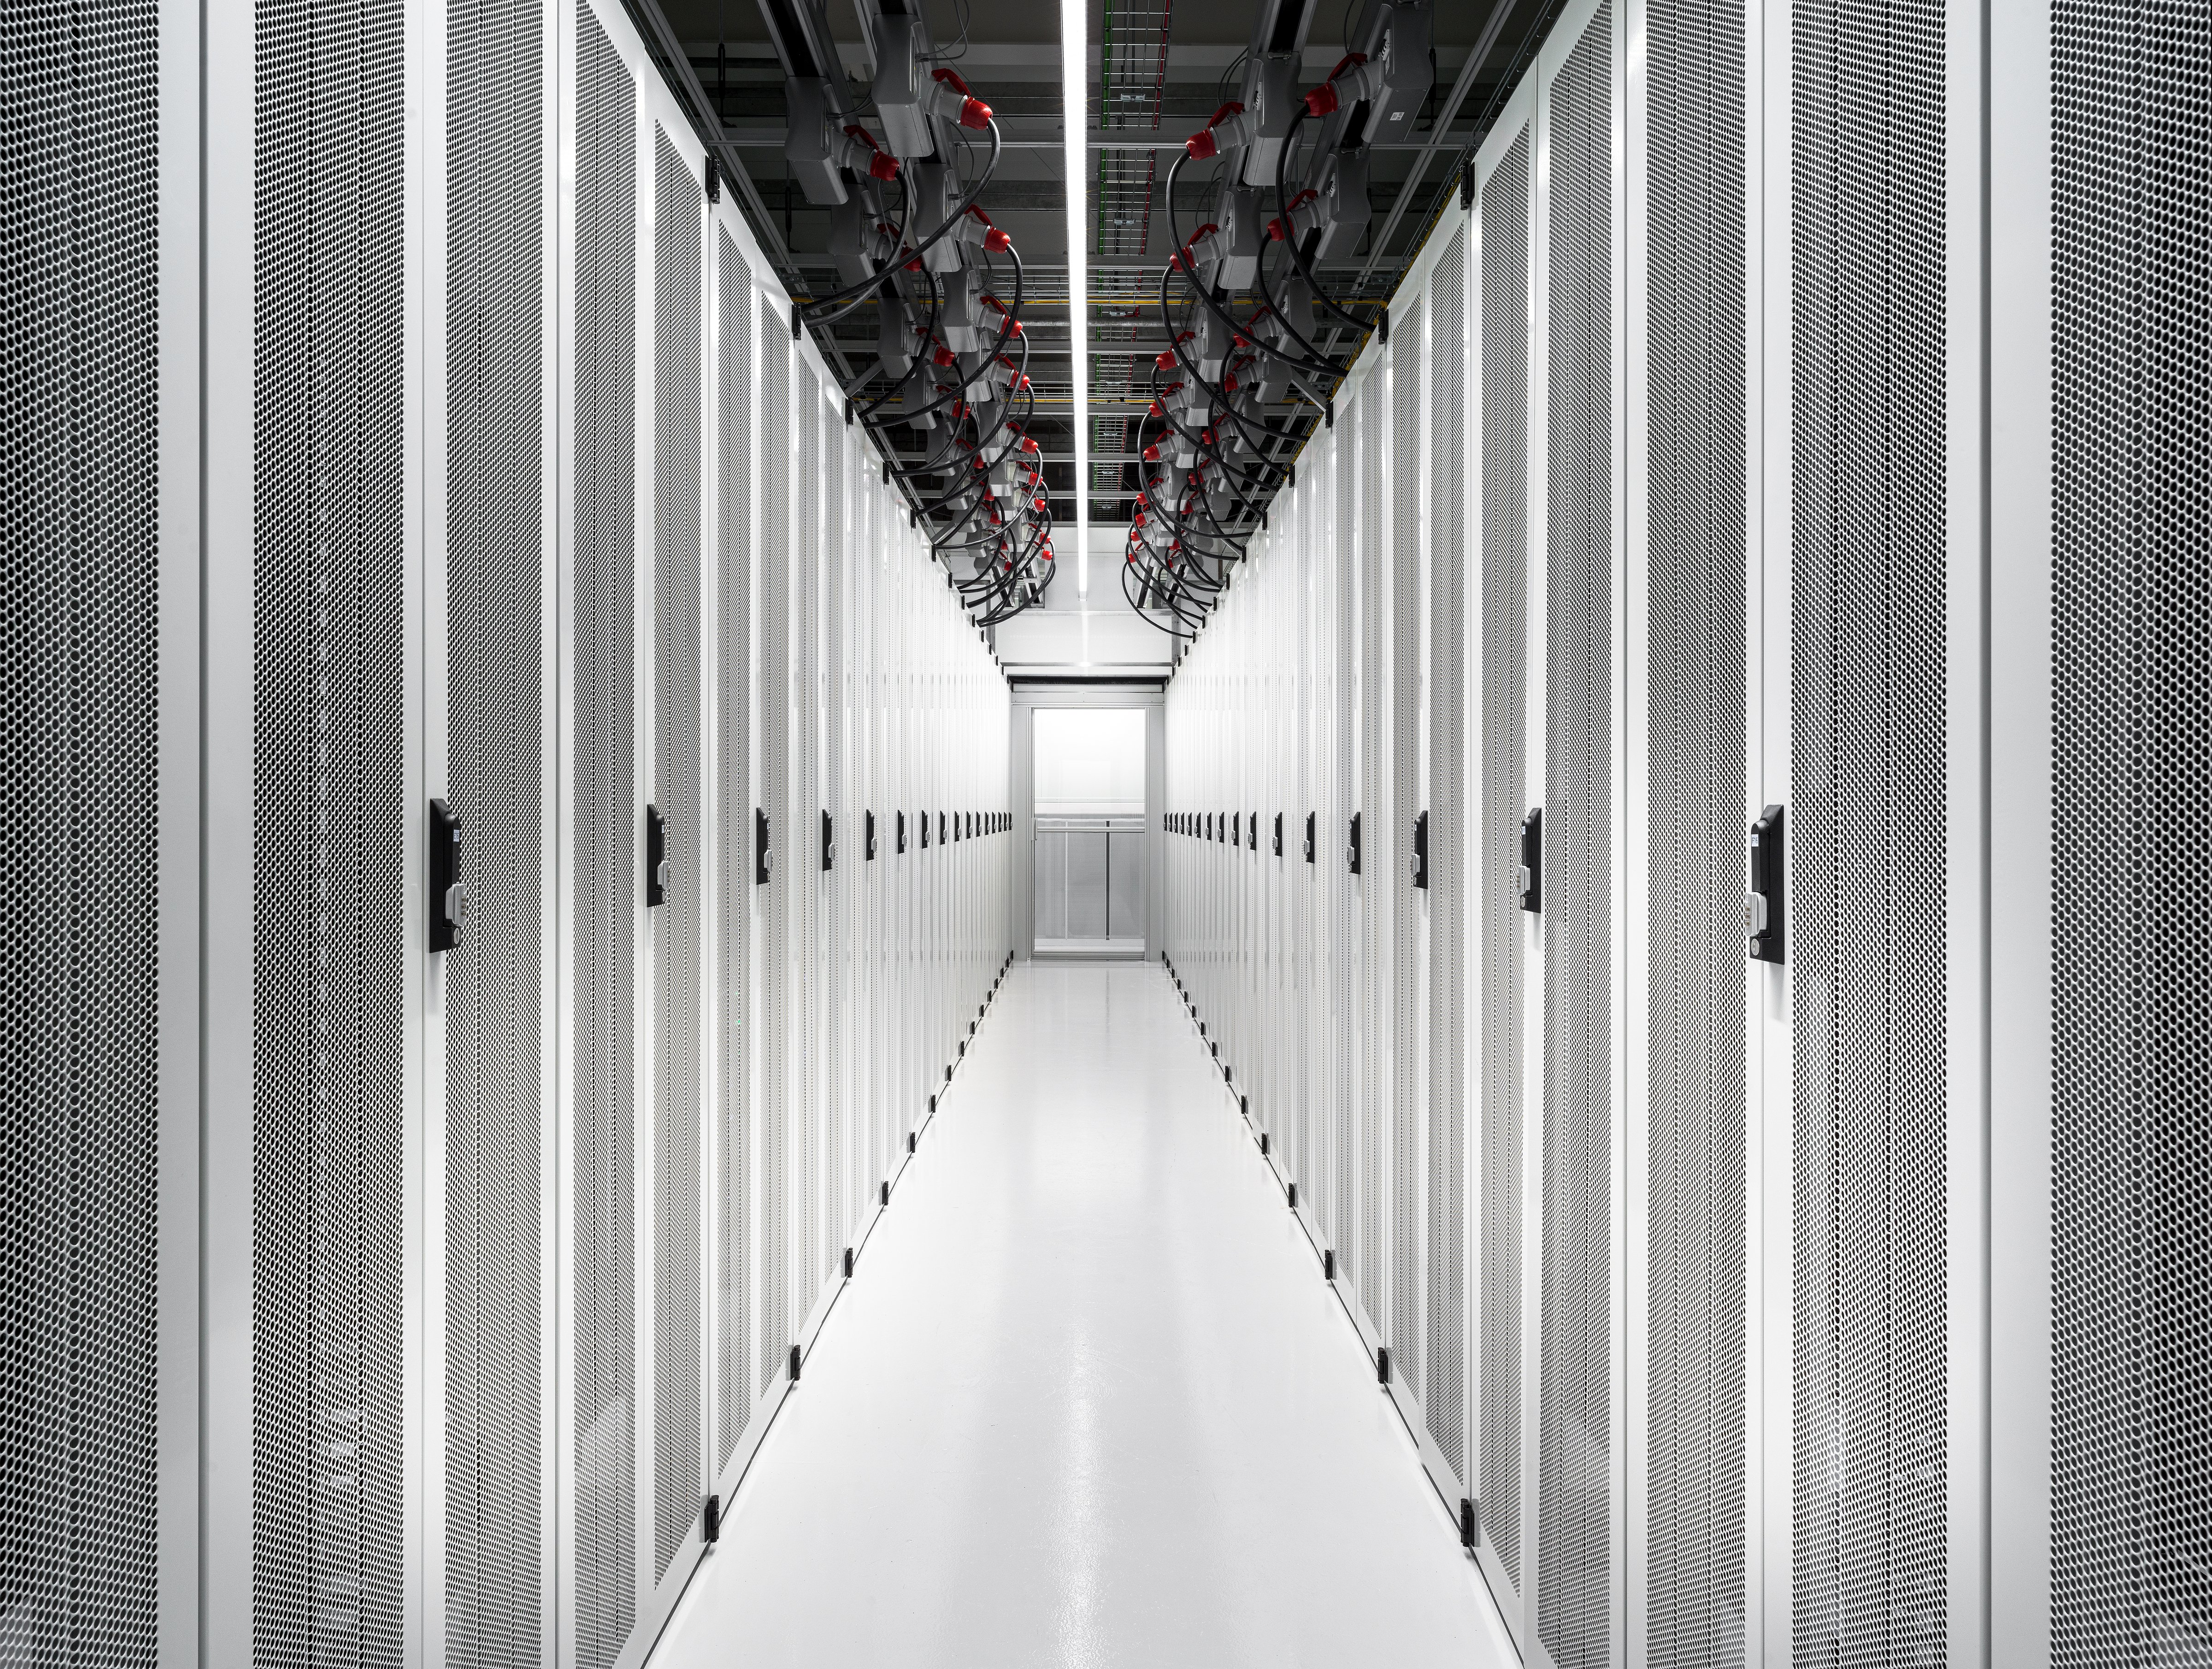 A data center in Iceland